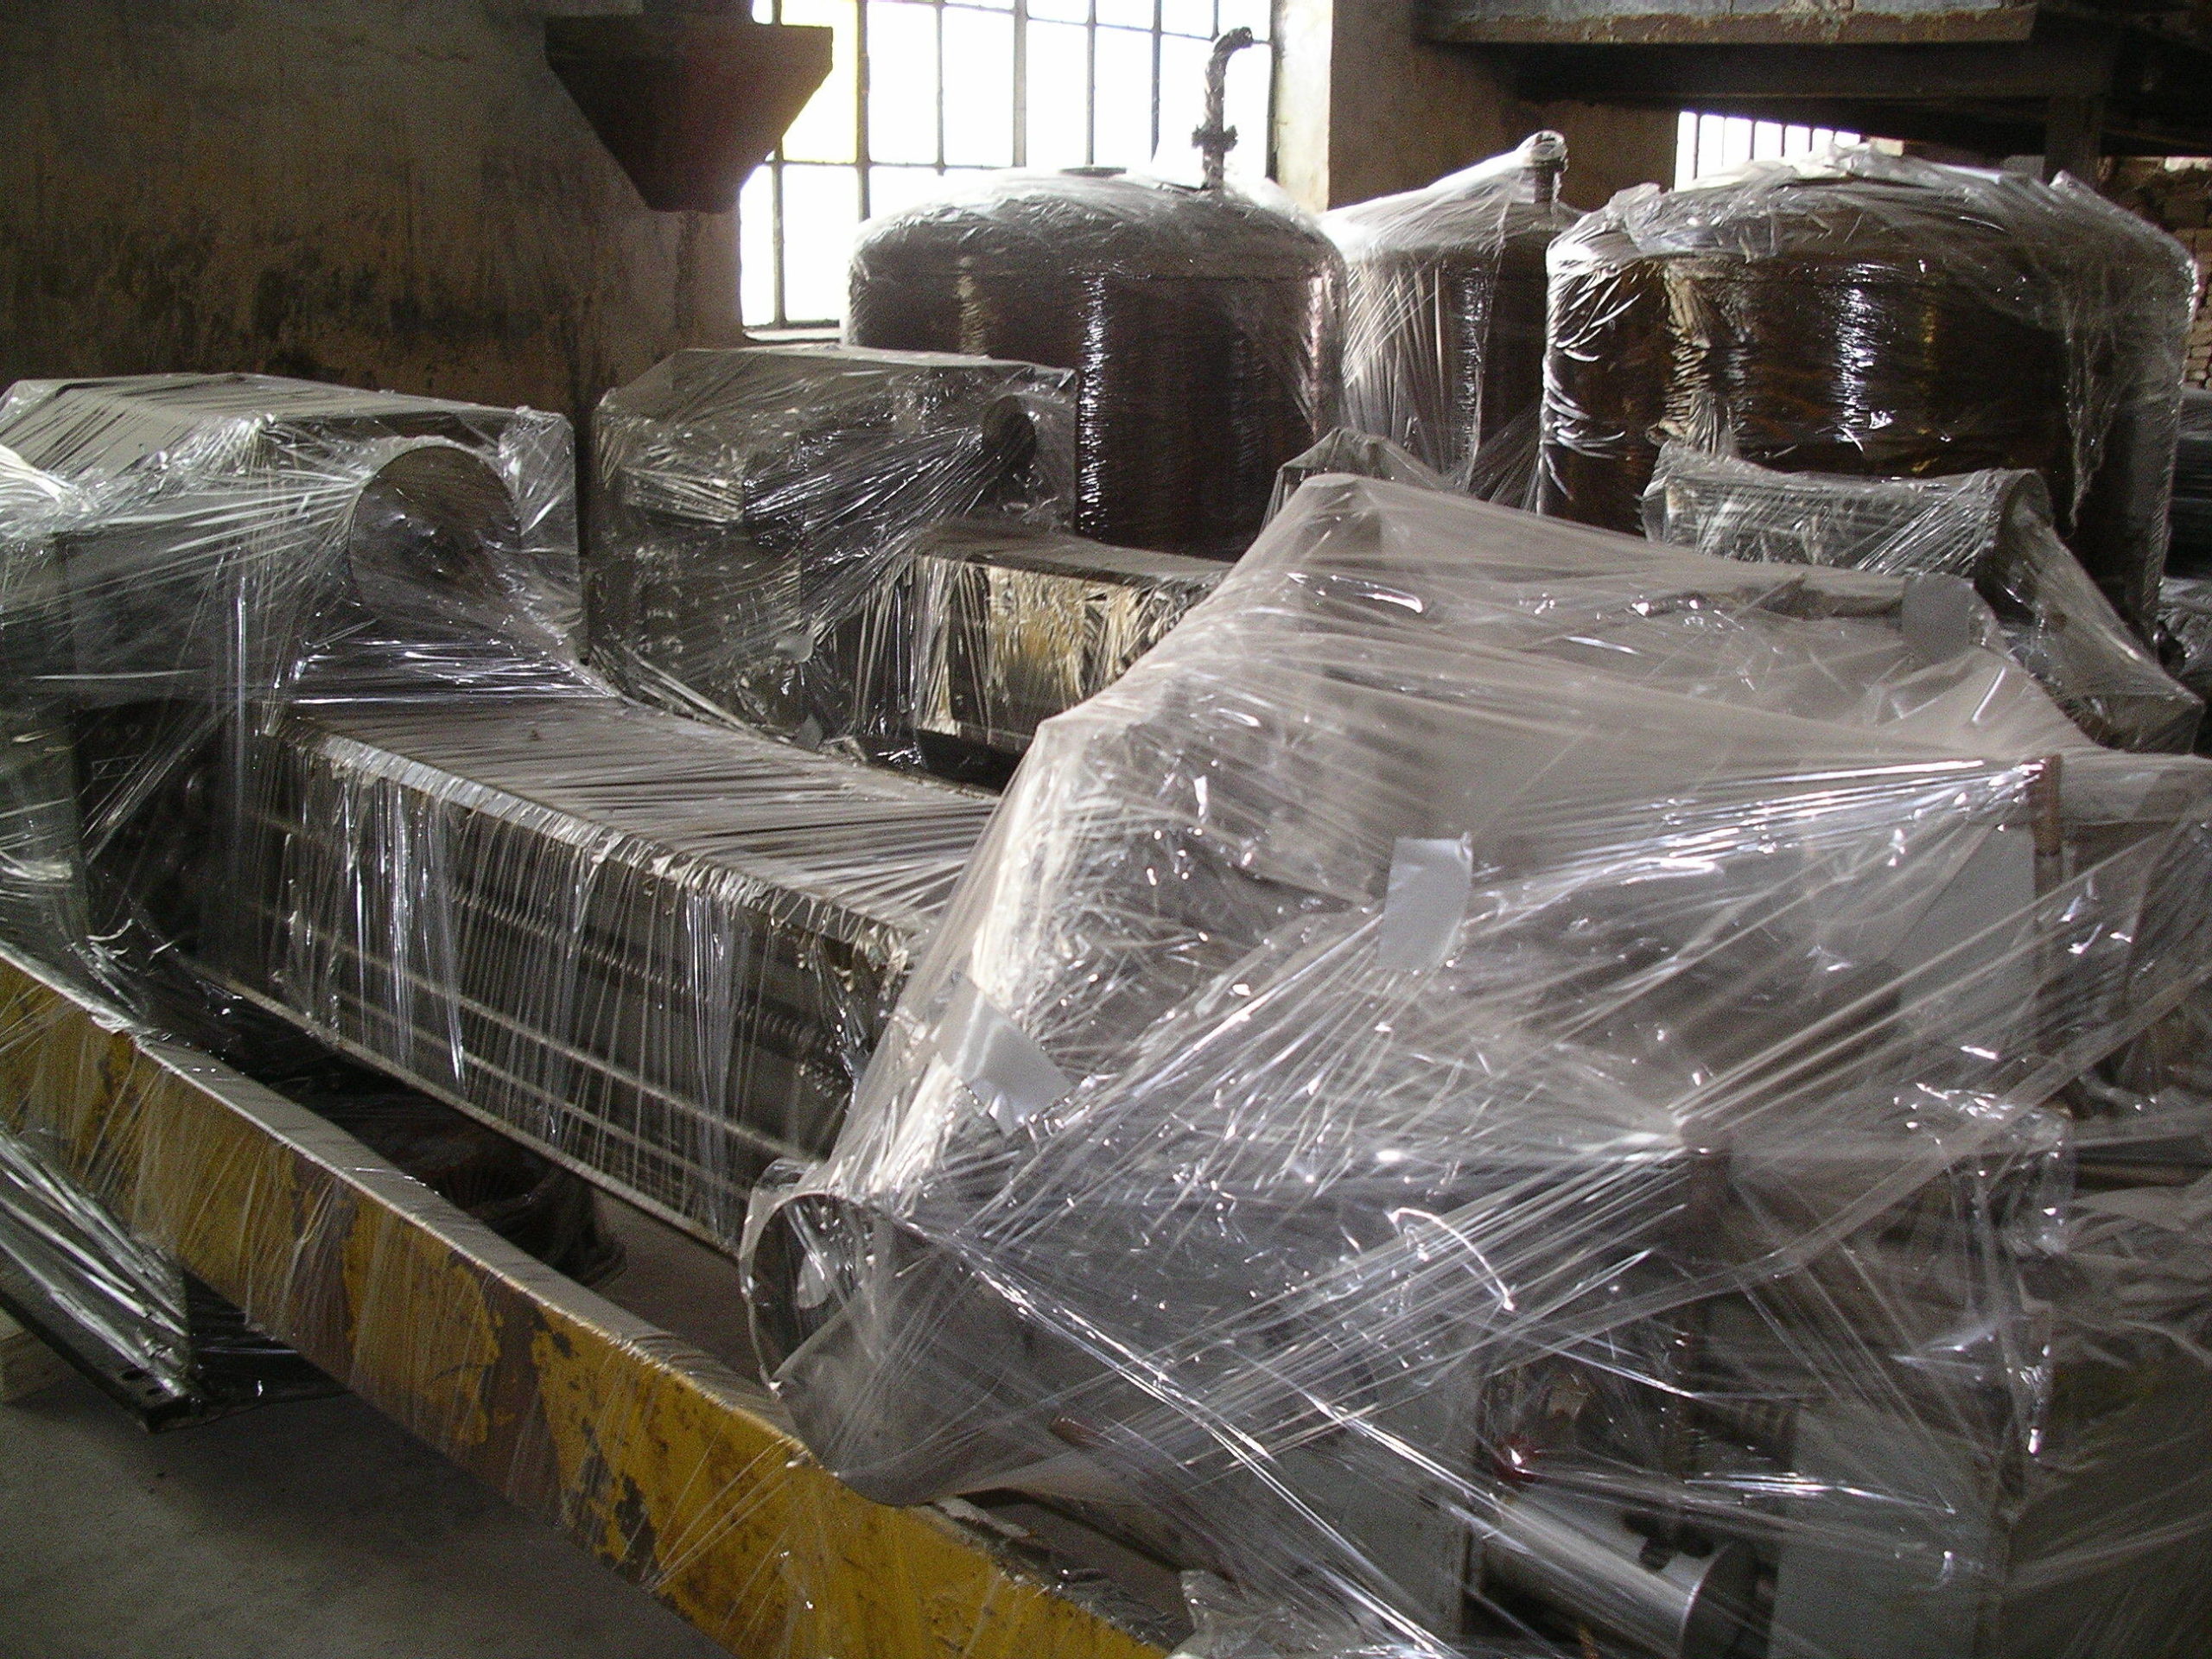 Massive metal equipment wrapped in clear plastic for storage